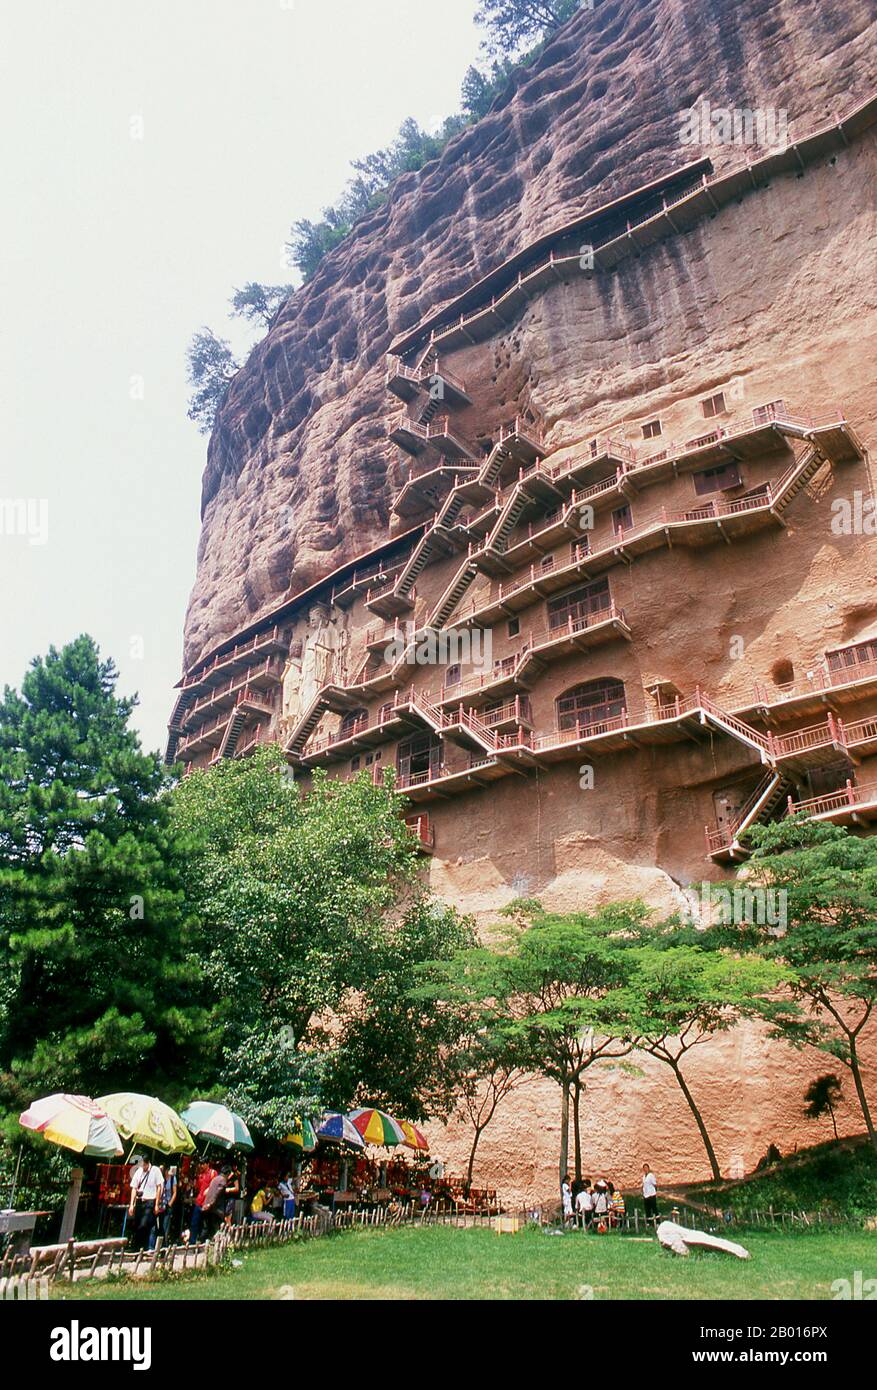 China: Staircases crisscross the Maiji Shan Grottoes, Tianshui, Gansu Province.  Maijishan Shiku (Maiji Shan Grottoes) are one of China’s four most important Buddhist temple groups (the others being Datong, Luoyang, and the Mogao Caves at Dunhuang).  Starting from the Northern Wei (386-535) and Northern Zhou (557-81) Dynasties, Buddhists cut caves into the sides of a red outcrop rising from the surrounding foliage-covered hills. Figures of the Buddha, of bodhisattvas and disciples were carved in harder rock brought from elsewhere, and installed in the caves. Stock Photo